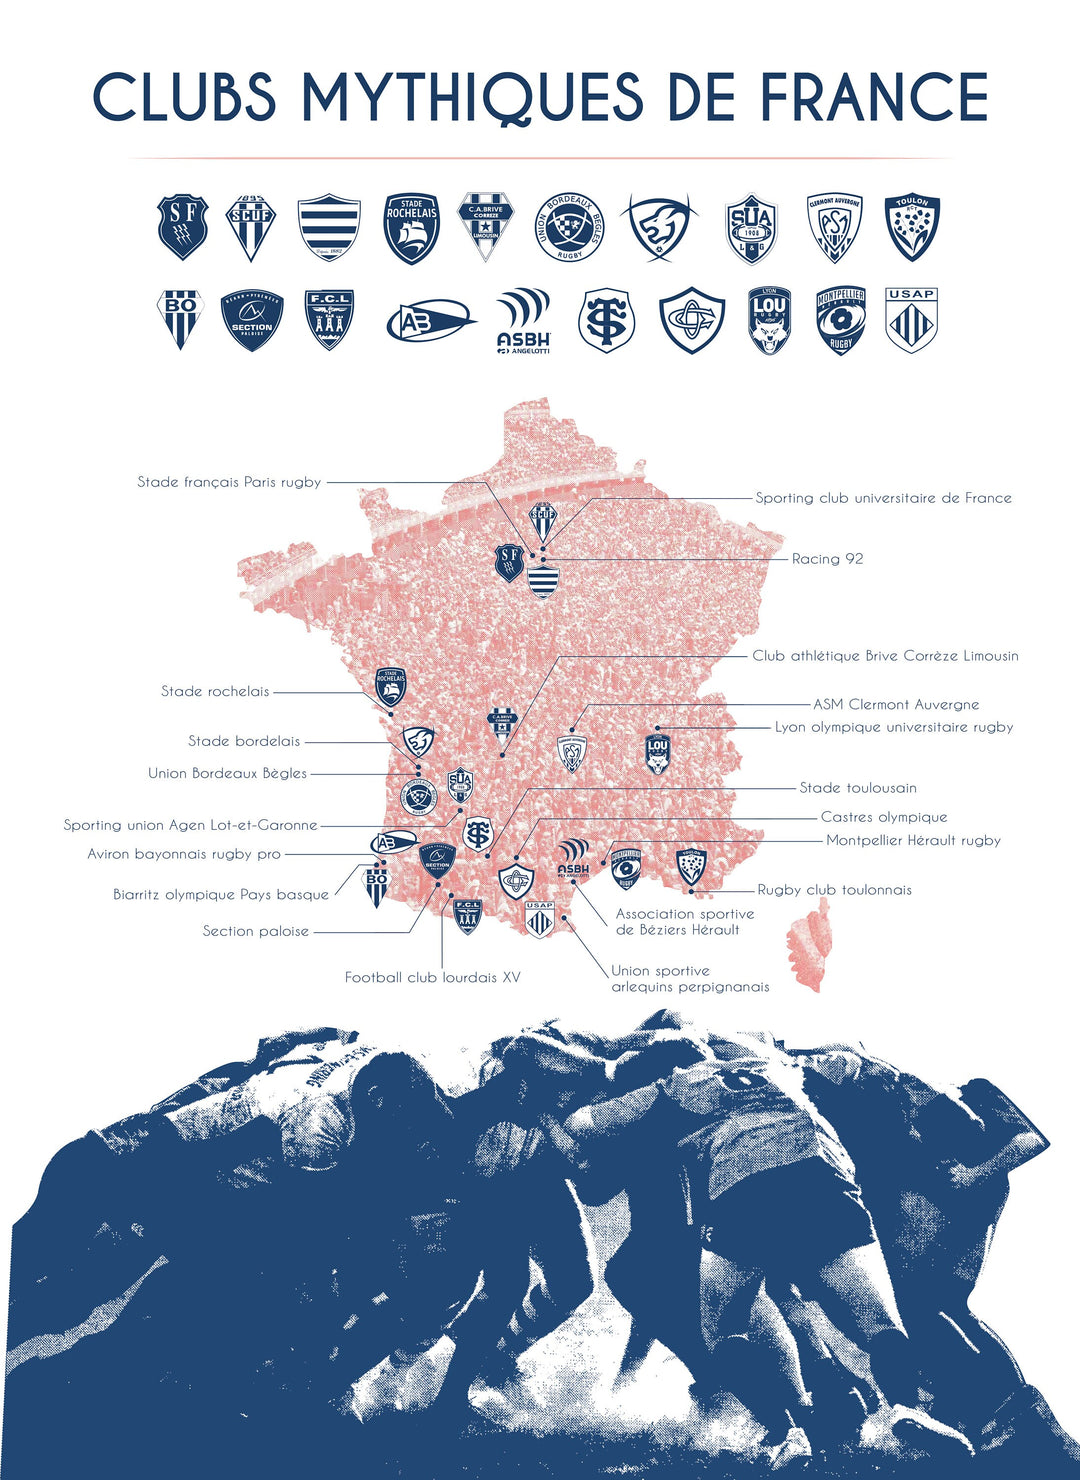 Affiche rugby clubs mythiques de France - top 14 - Rugby championnat